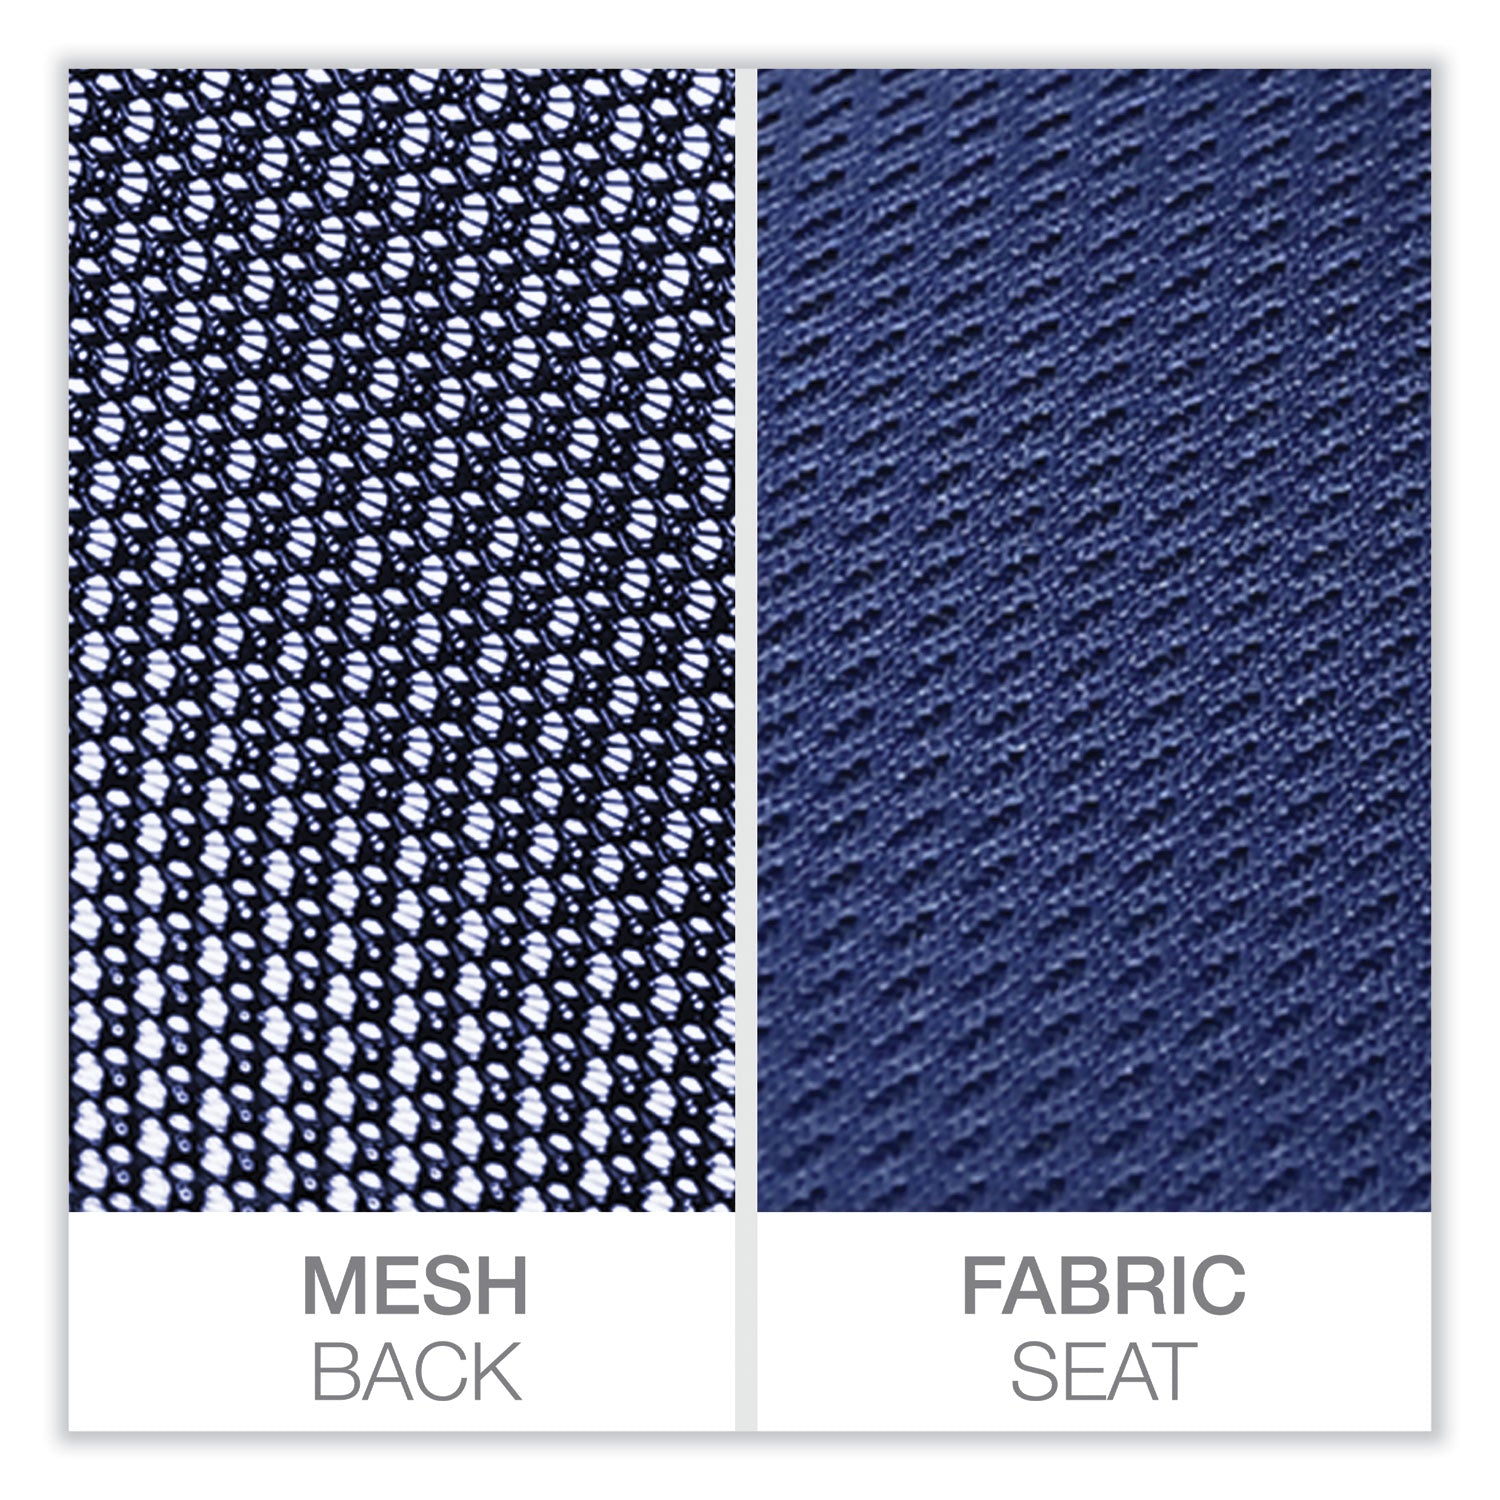 mesh-back-fabric-task-chair-supports-up-to-275-lb-1732-to-211-seat-height-navy-seat-navy-back_alews42b27 - 2